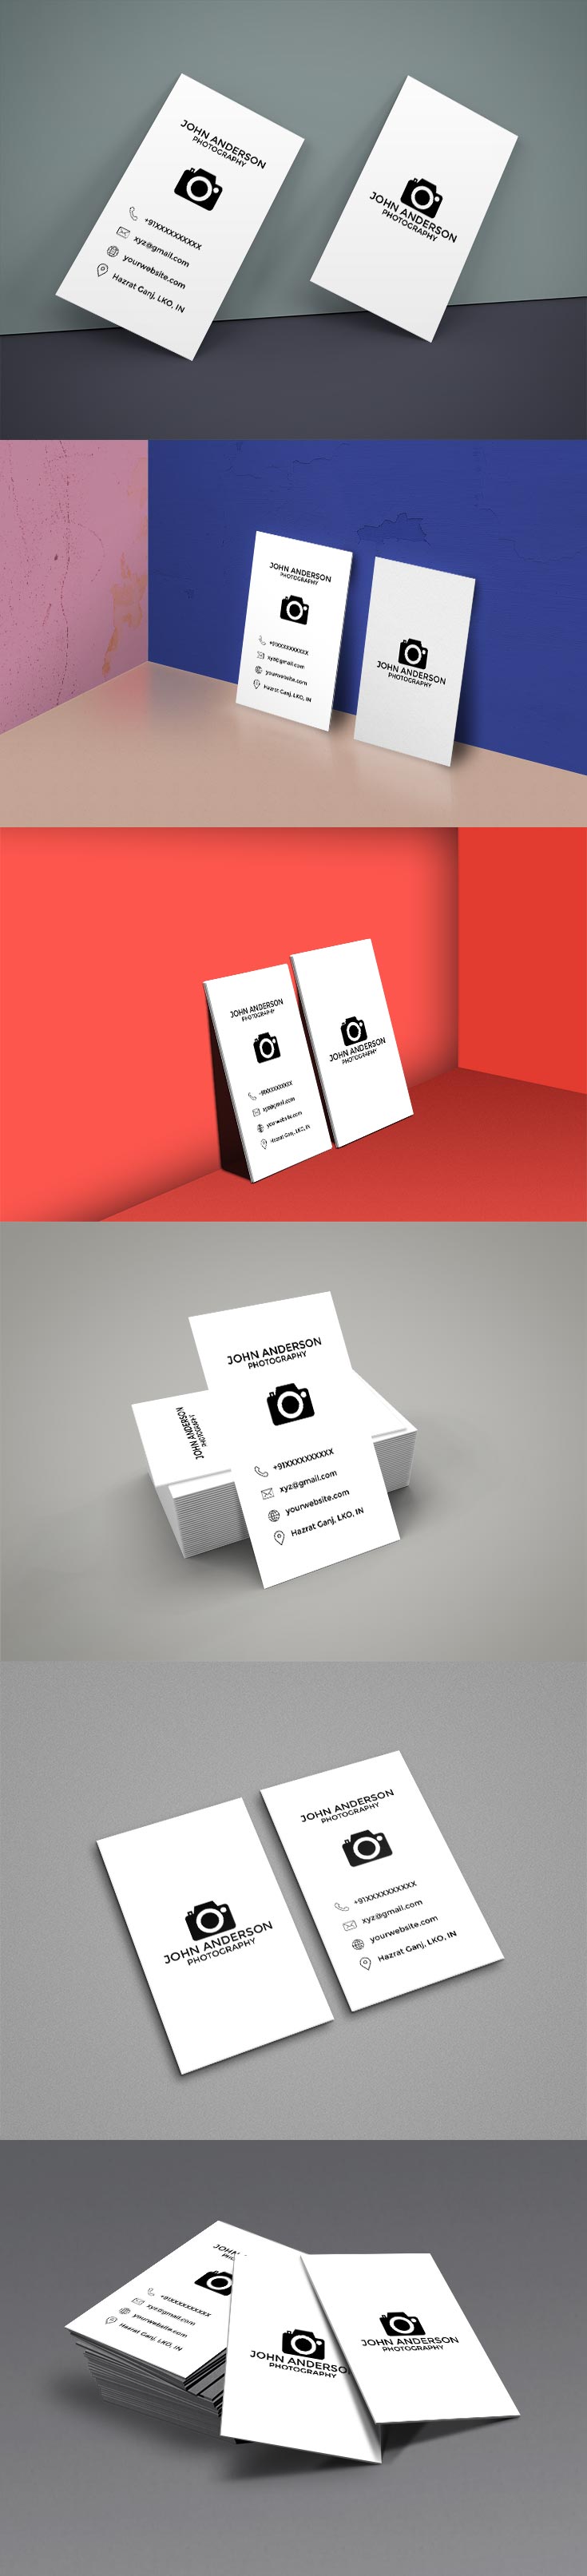 Free Photography Vertical Business Card